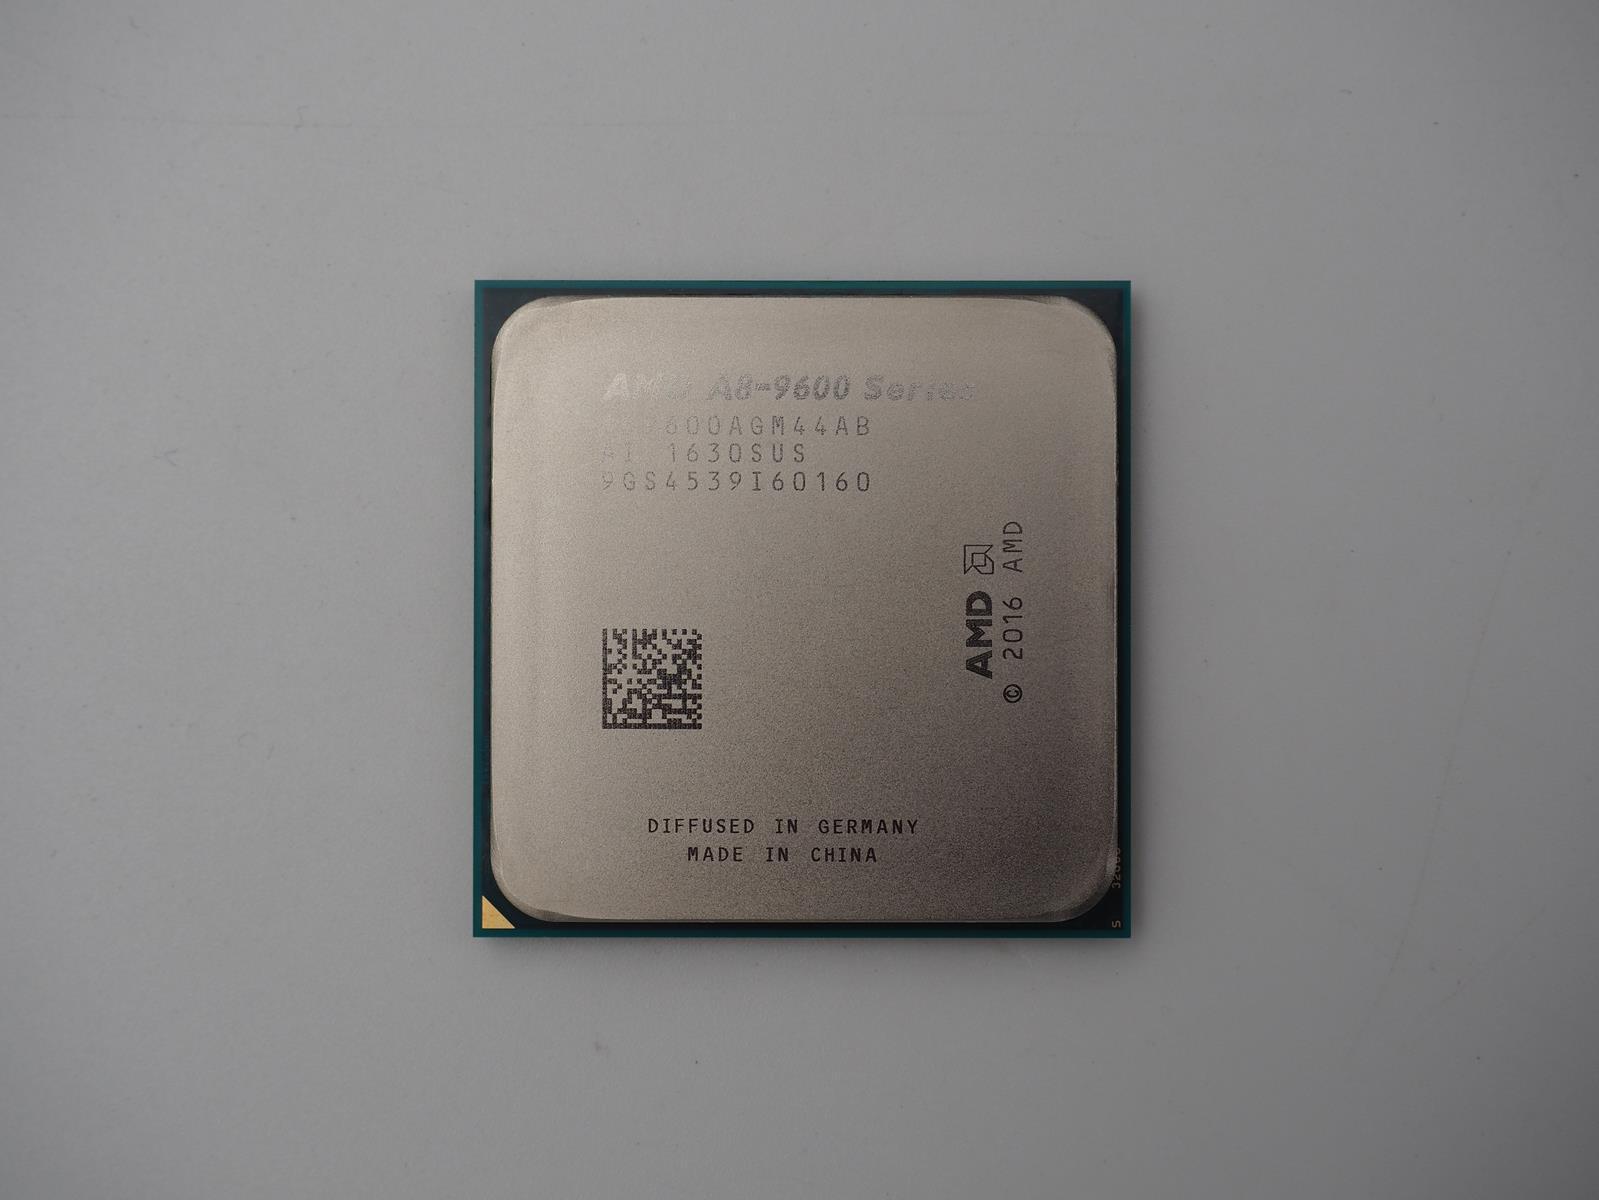 AMD A8-9600 SERIES AD9600AGM44AB 3.10GHz AM4 CPU Processor Tested -Working